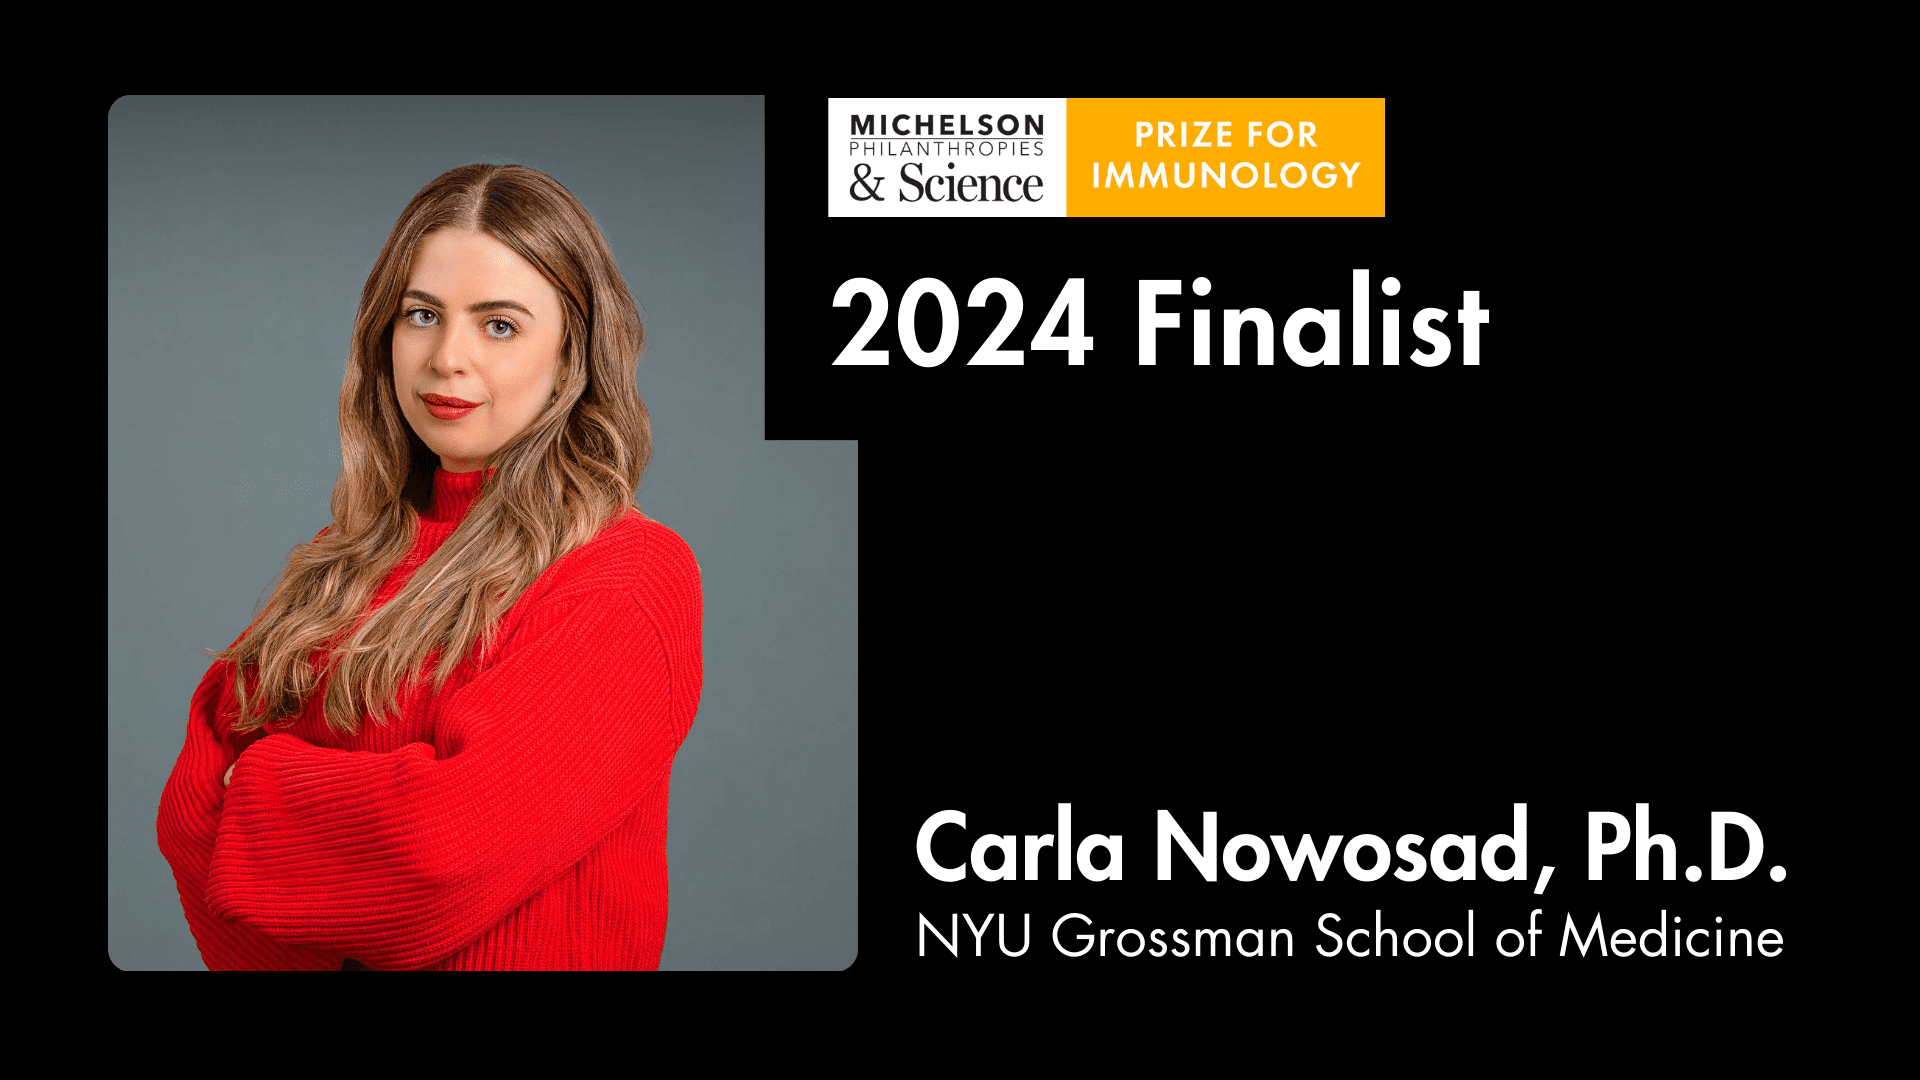 Michelson Prize Finalist Dr. Carla Nowosad’s Research Explores How Bacteria and Antibodies Coexist in the Gut